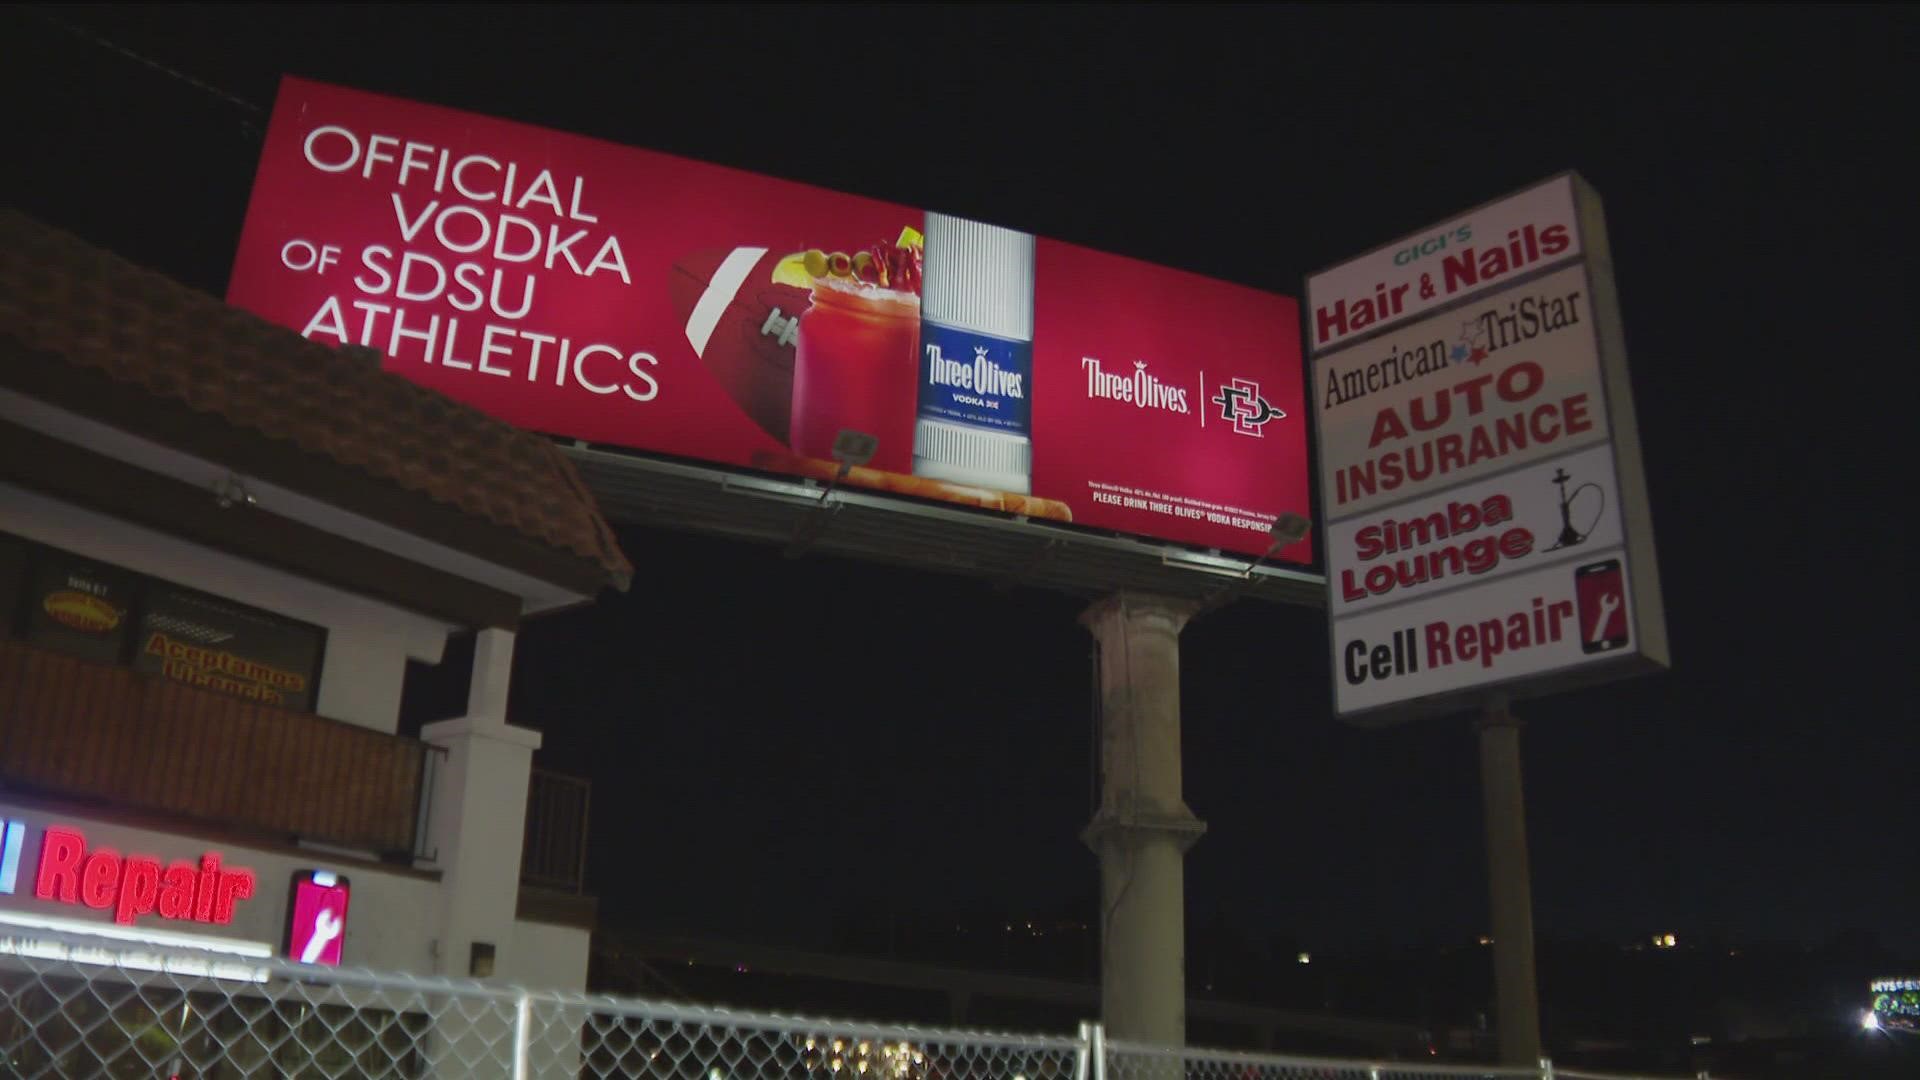 A vodka billboard near San Diego State University advertising its partnership with SDSU Athletics is drawing criticism considering recent alleged criminal events.